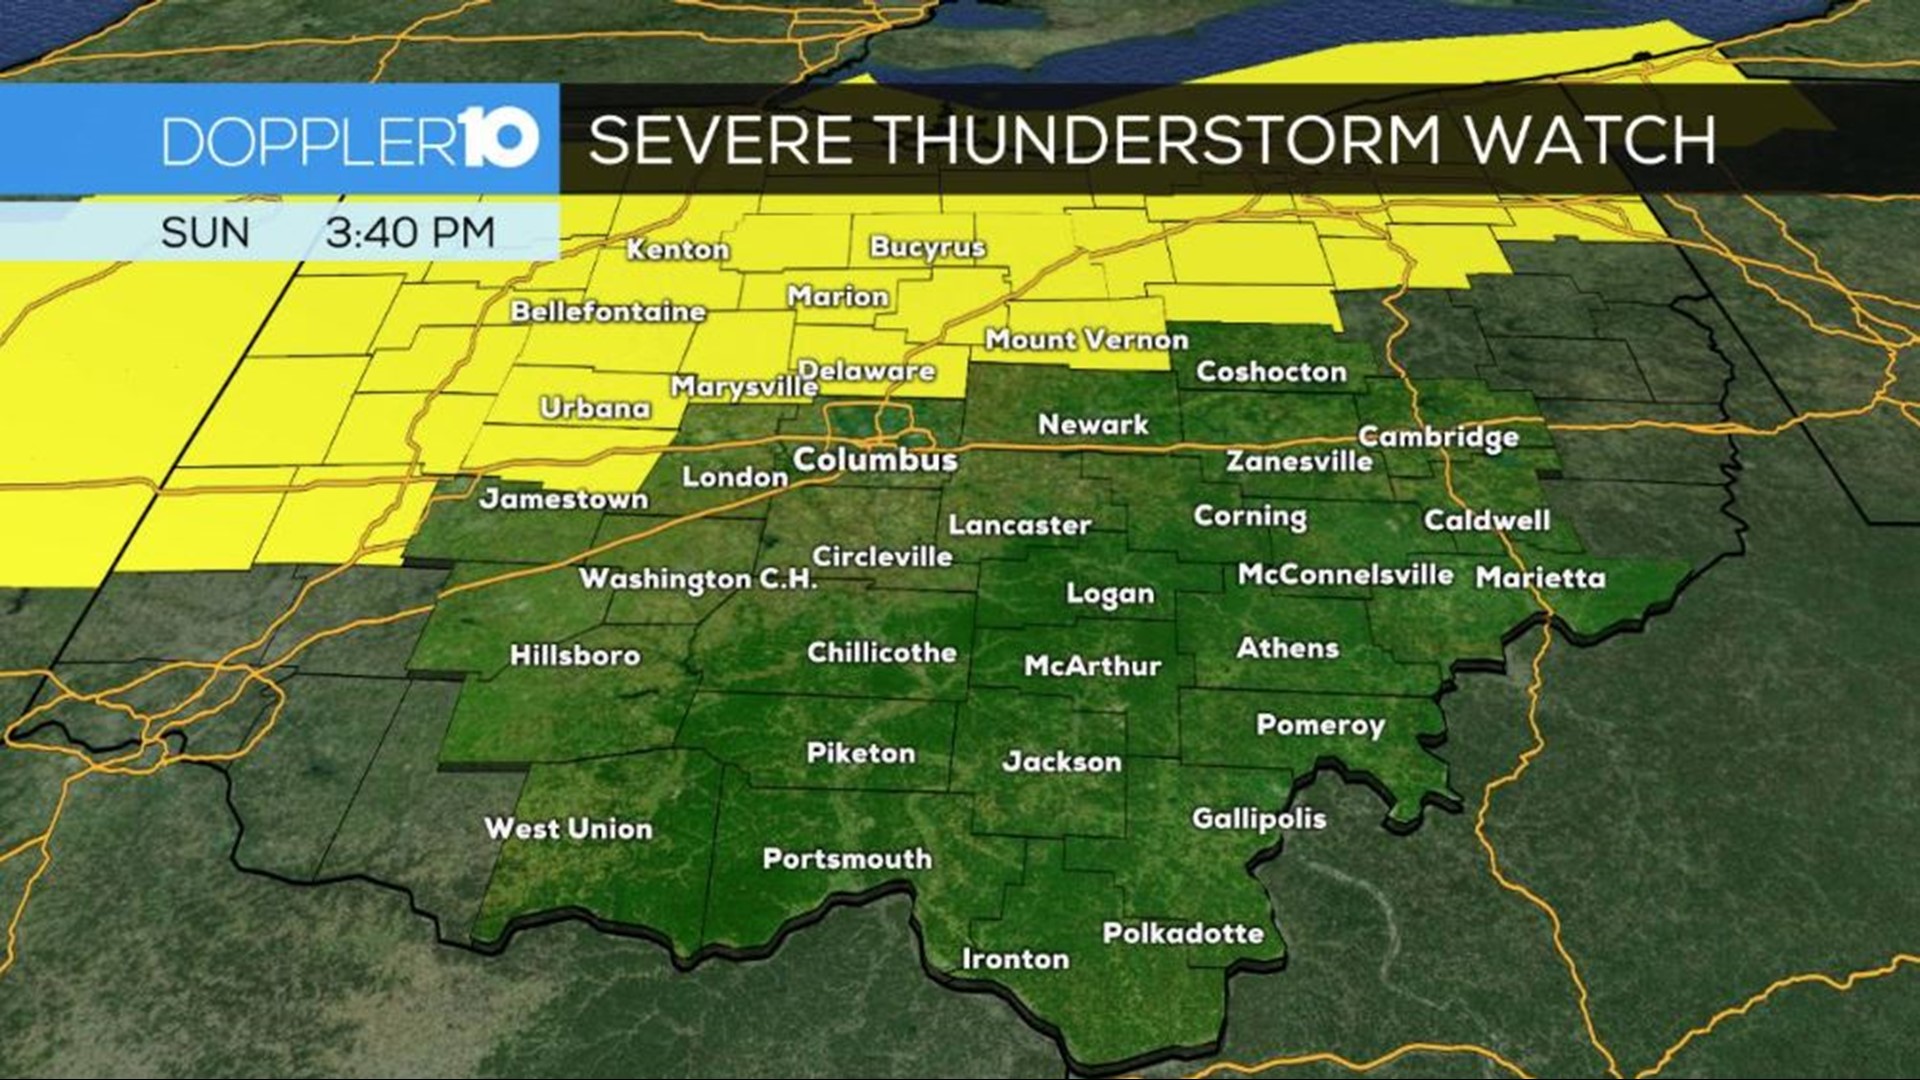 Severe Thunderstorm Watch Issued For Parts Of Central Ohio Until 10 Pm